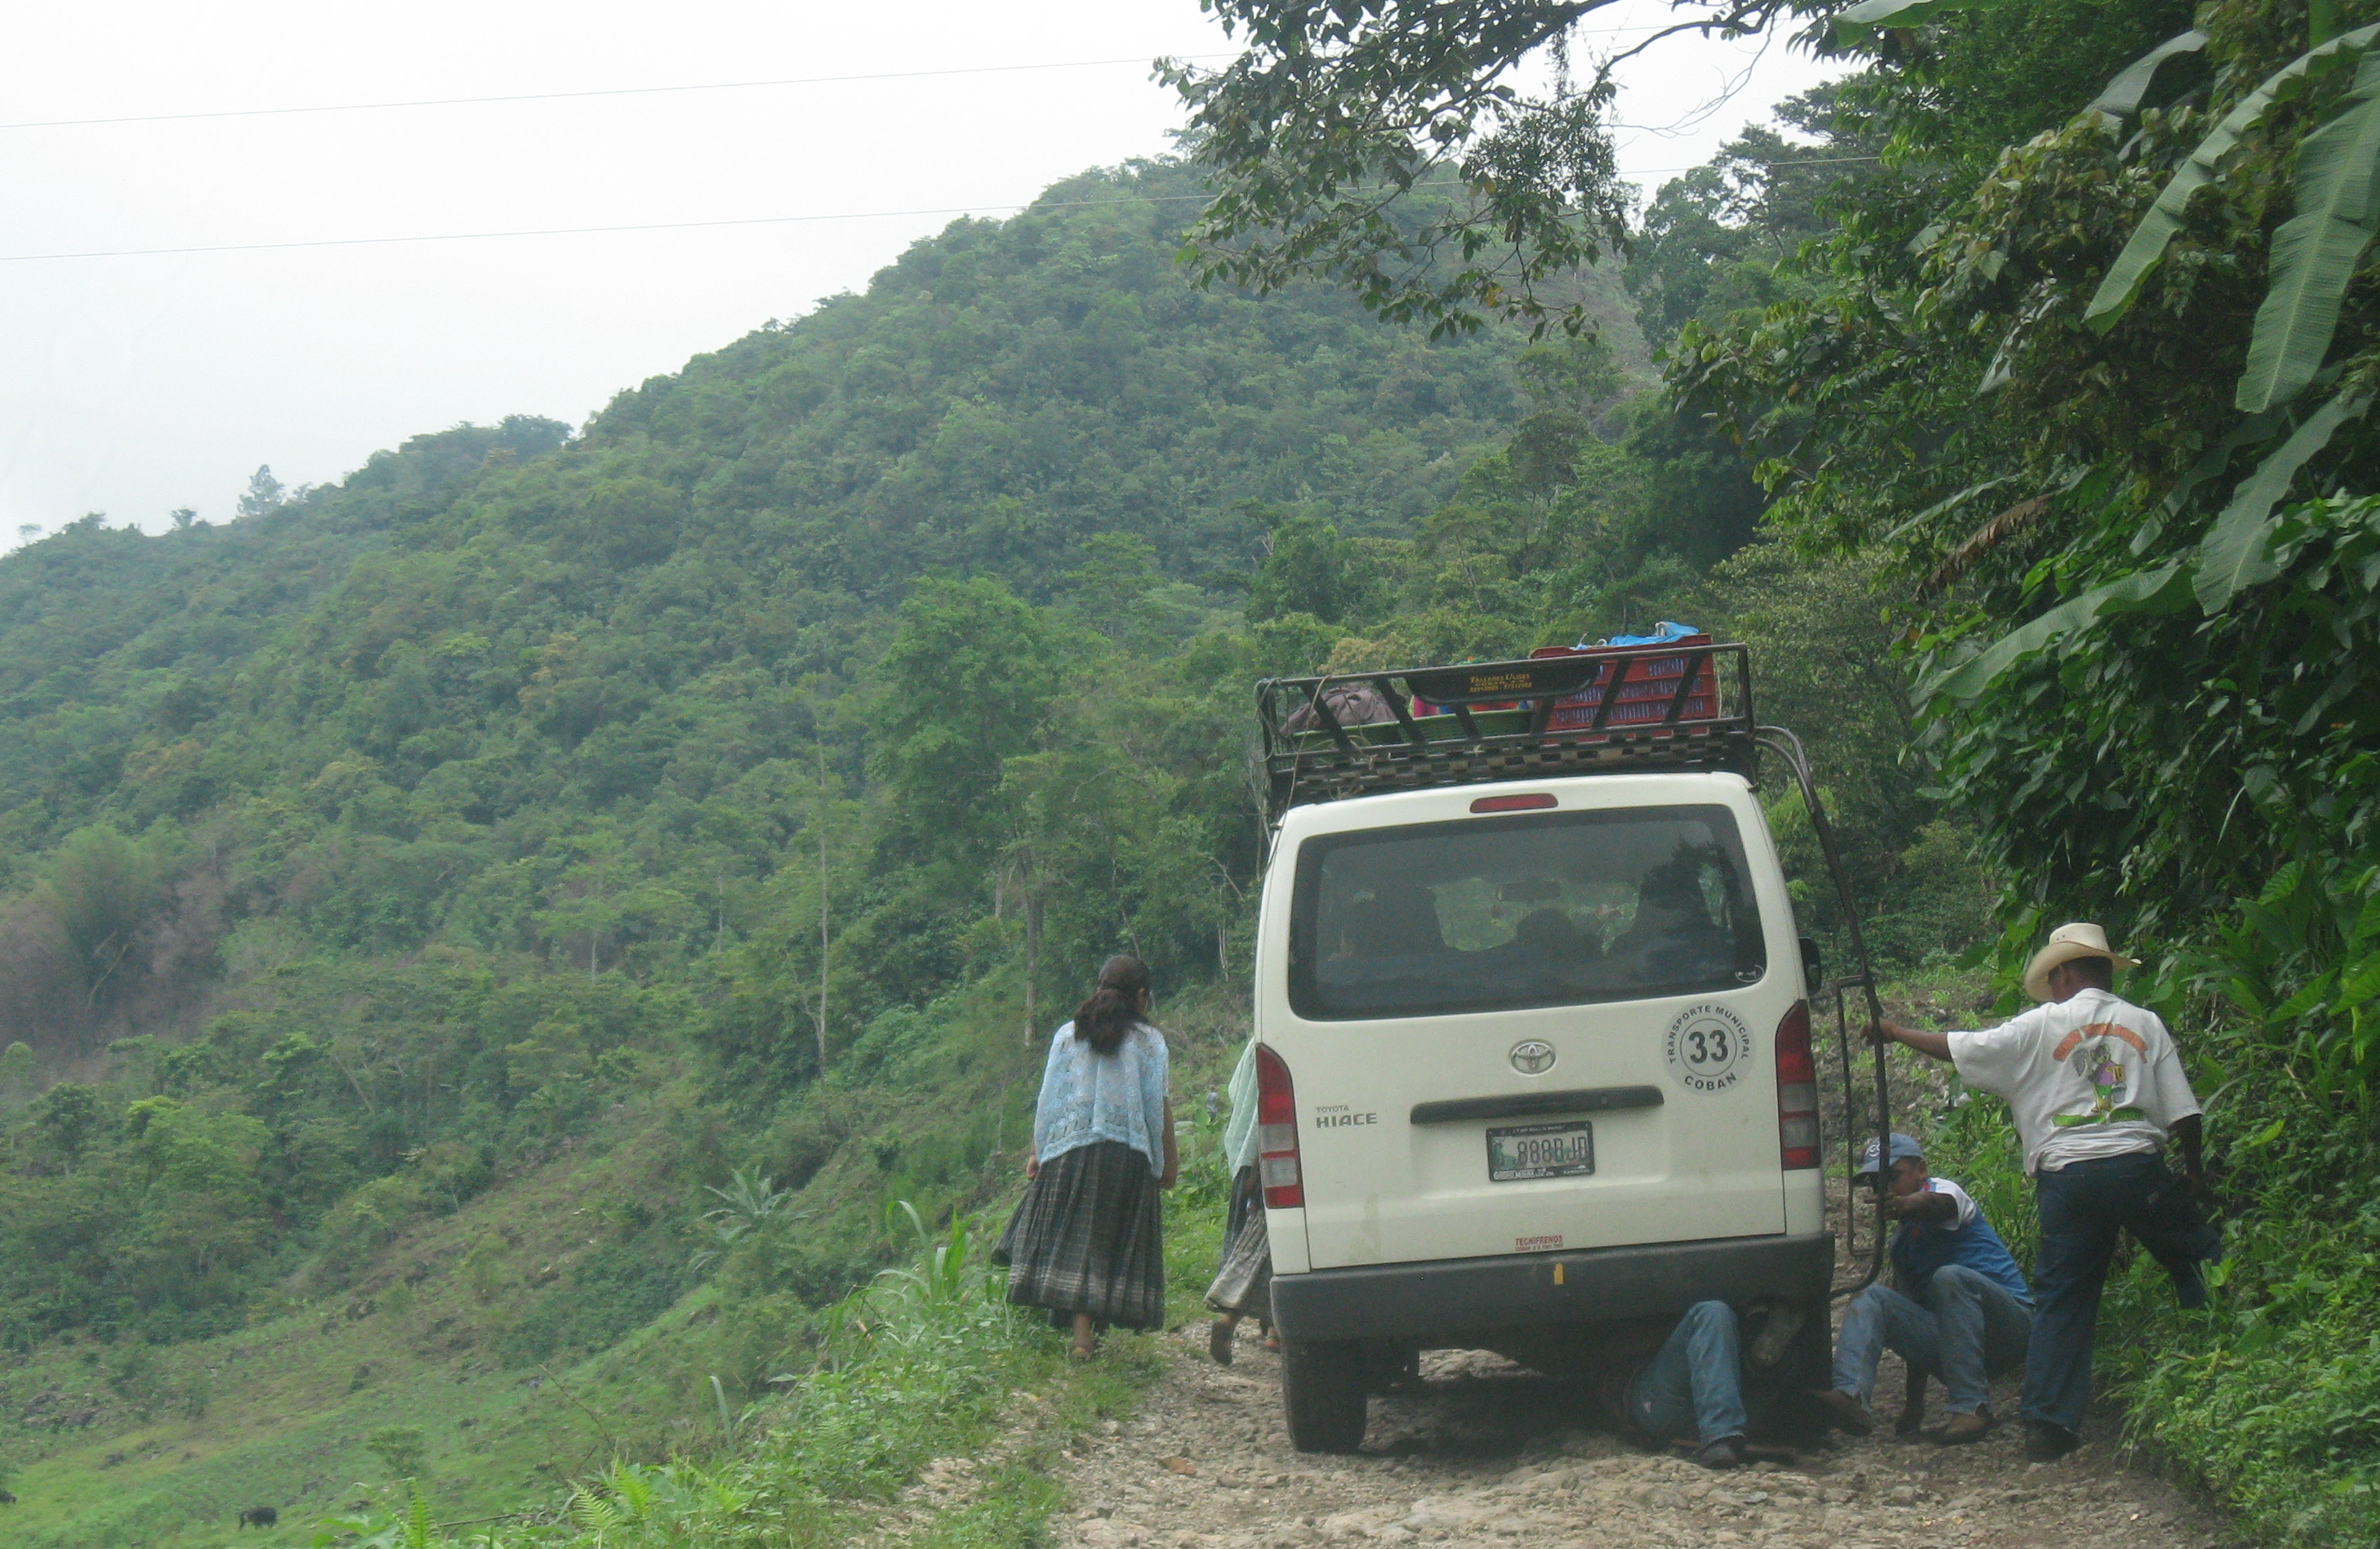 Obstacles on the road to reaching the rural poor in Guatemala